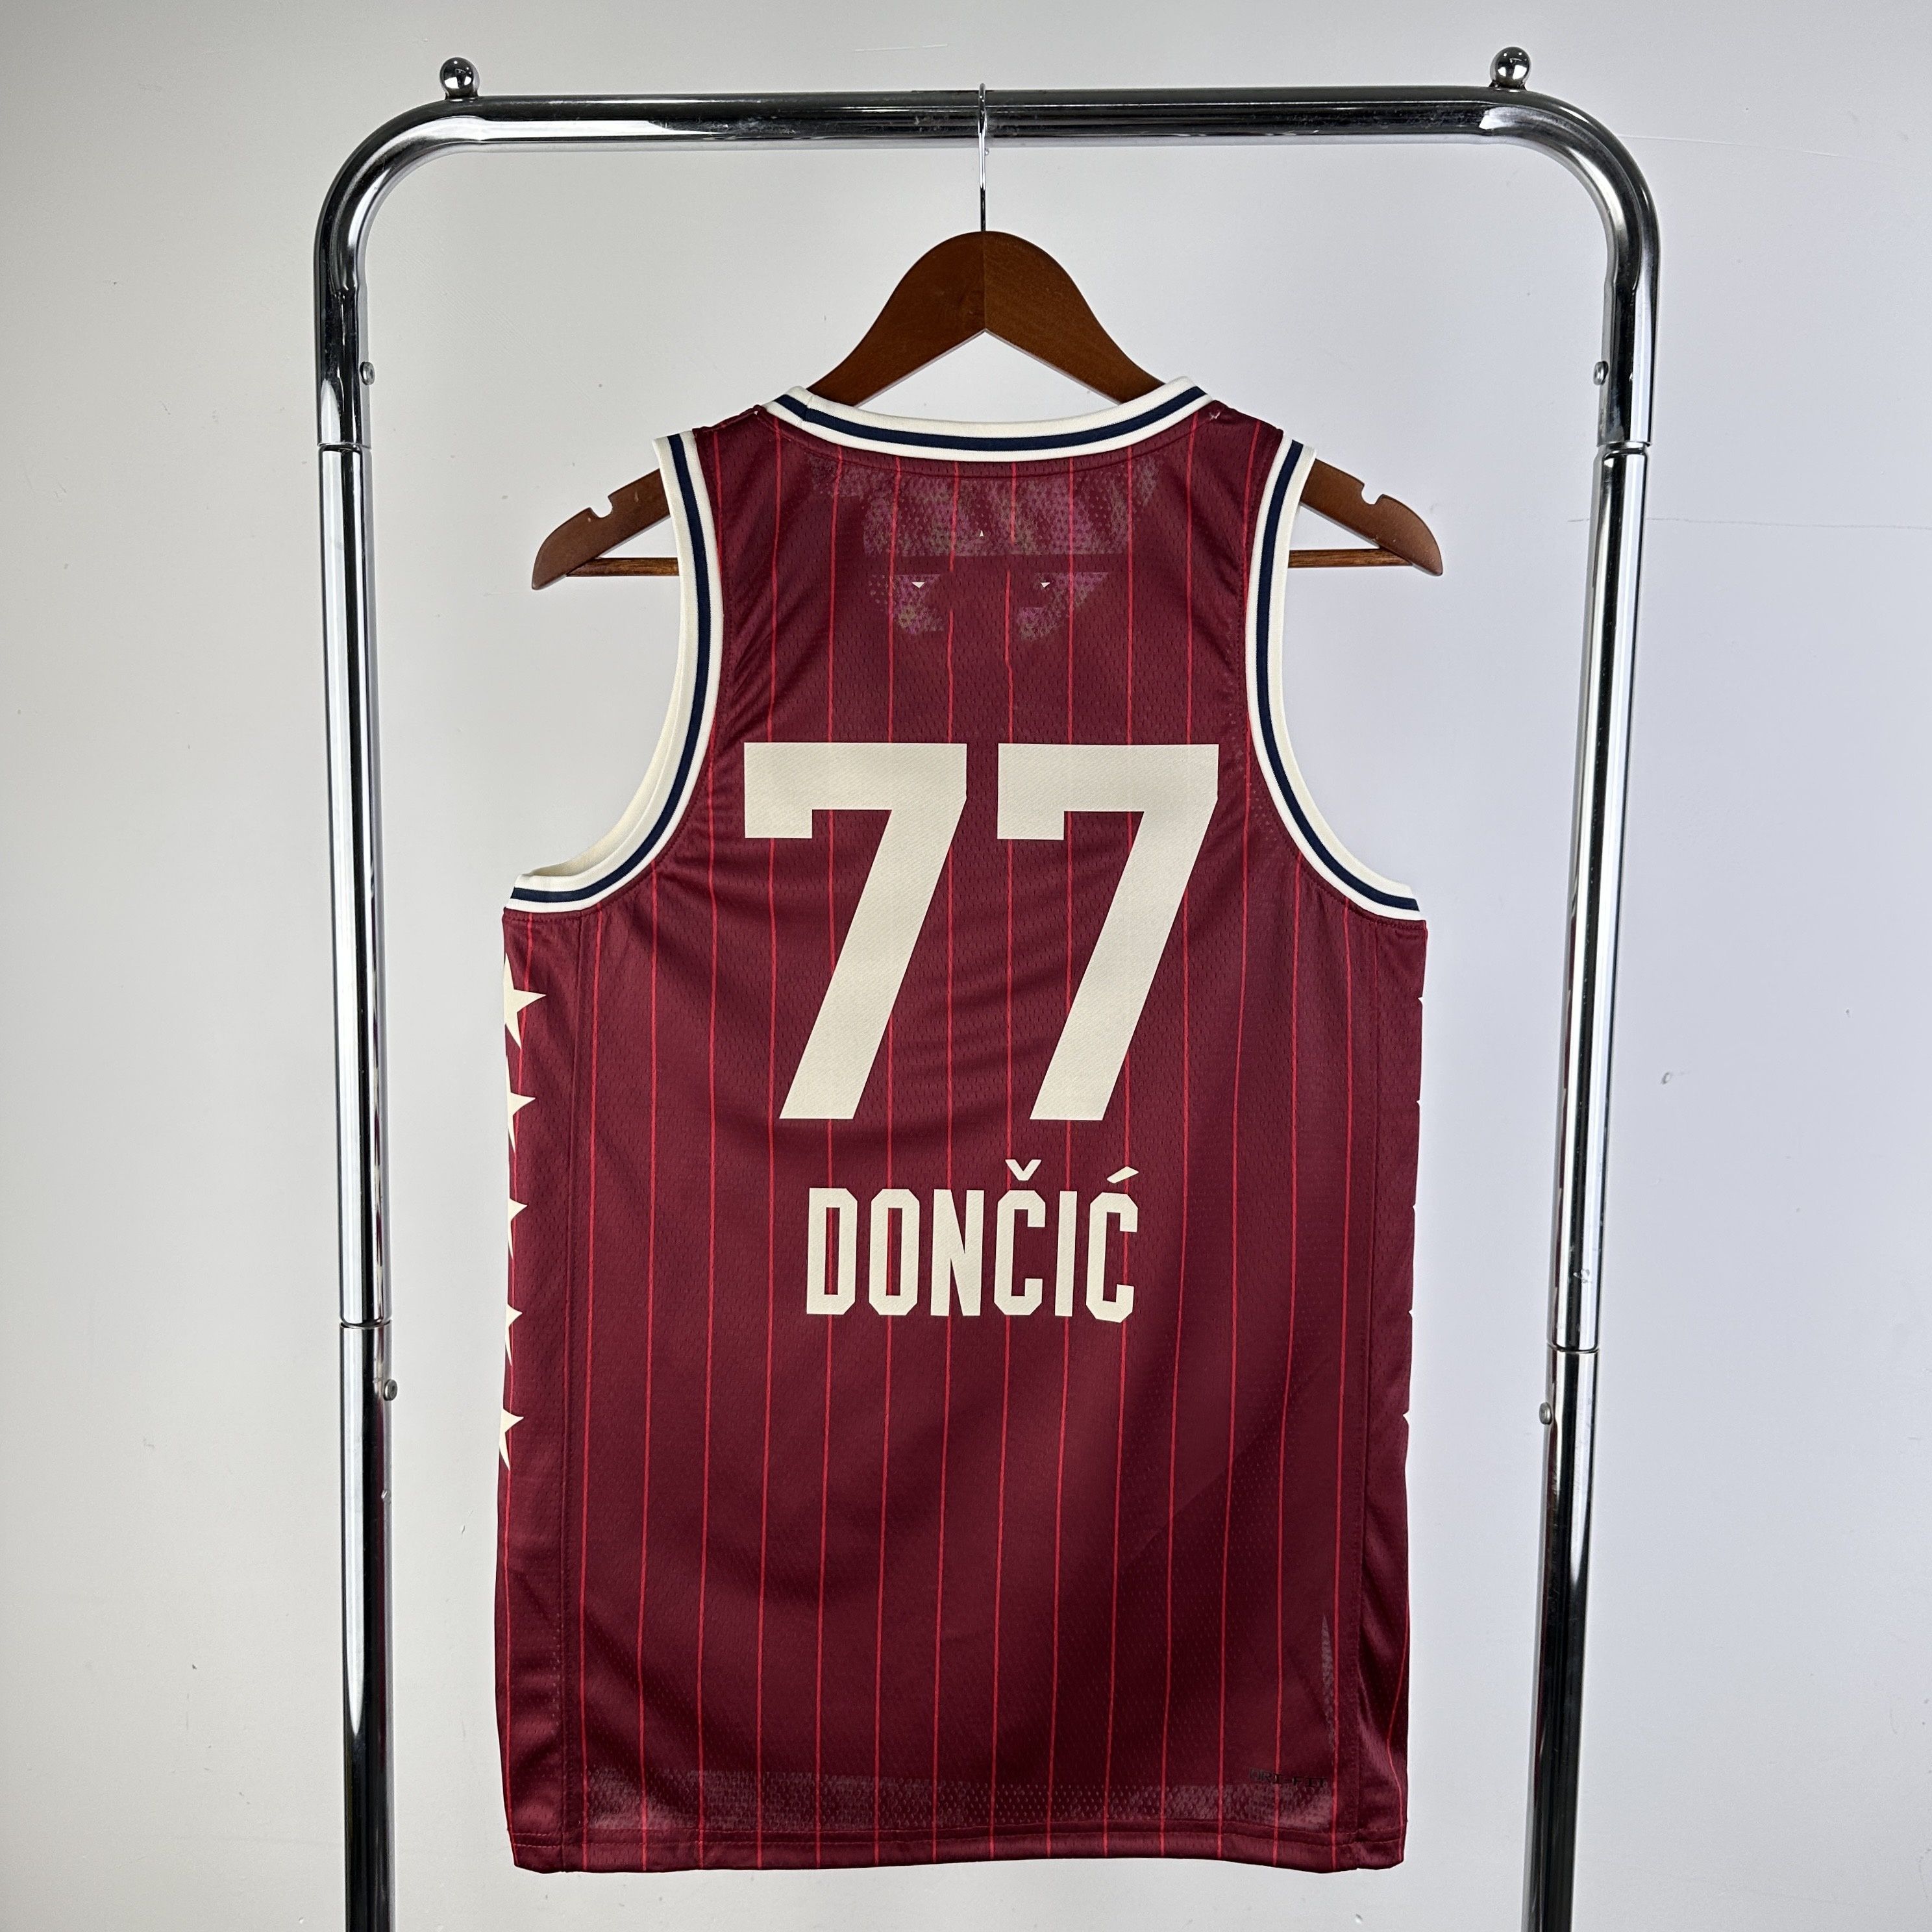 # 77 Doncic